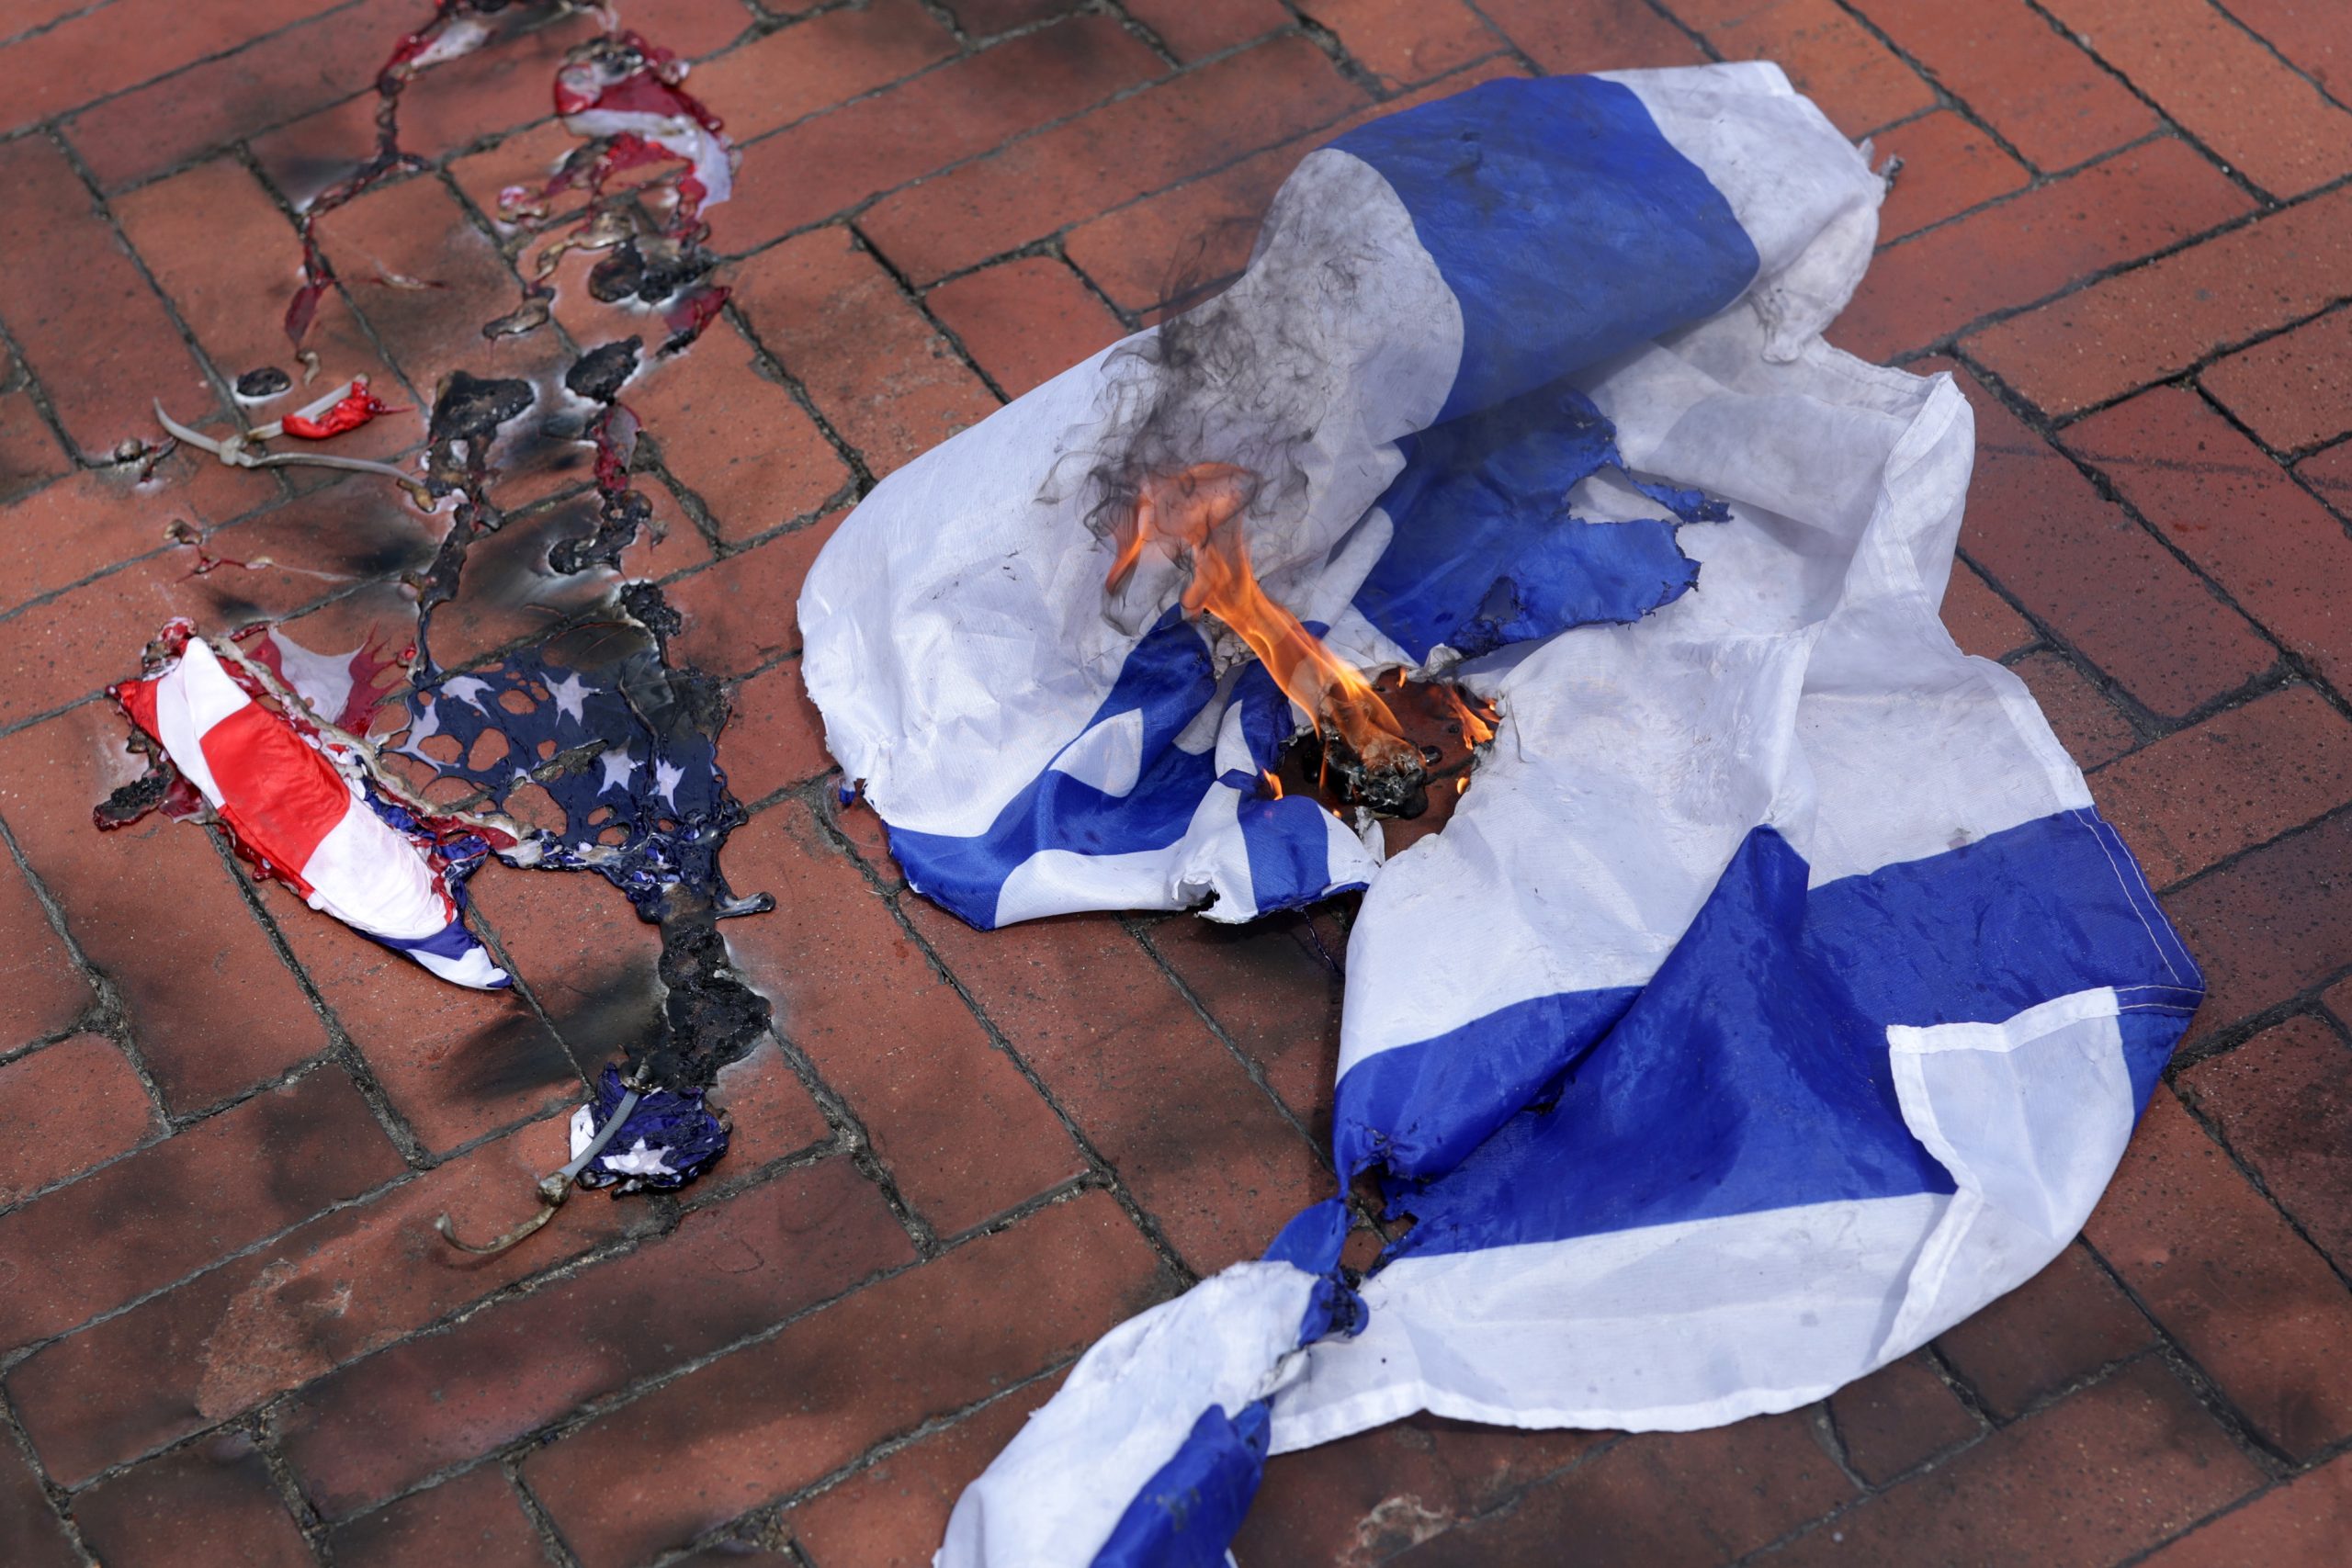 Biden-Harris Admin Denied Resources to Police During Pro-Hamas Protest Where Agitators Burned American Flag, Committee Chairman Says